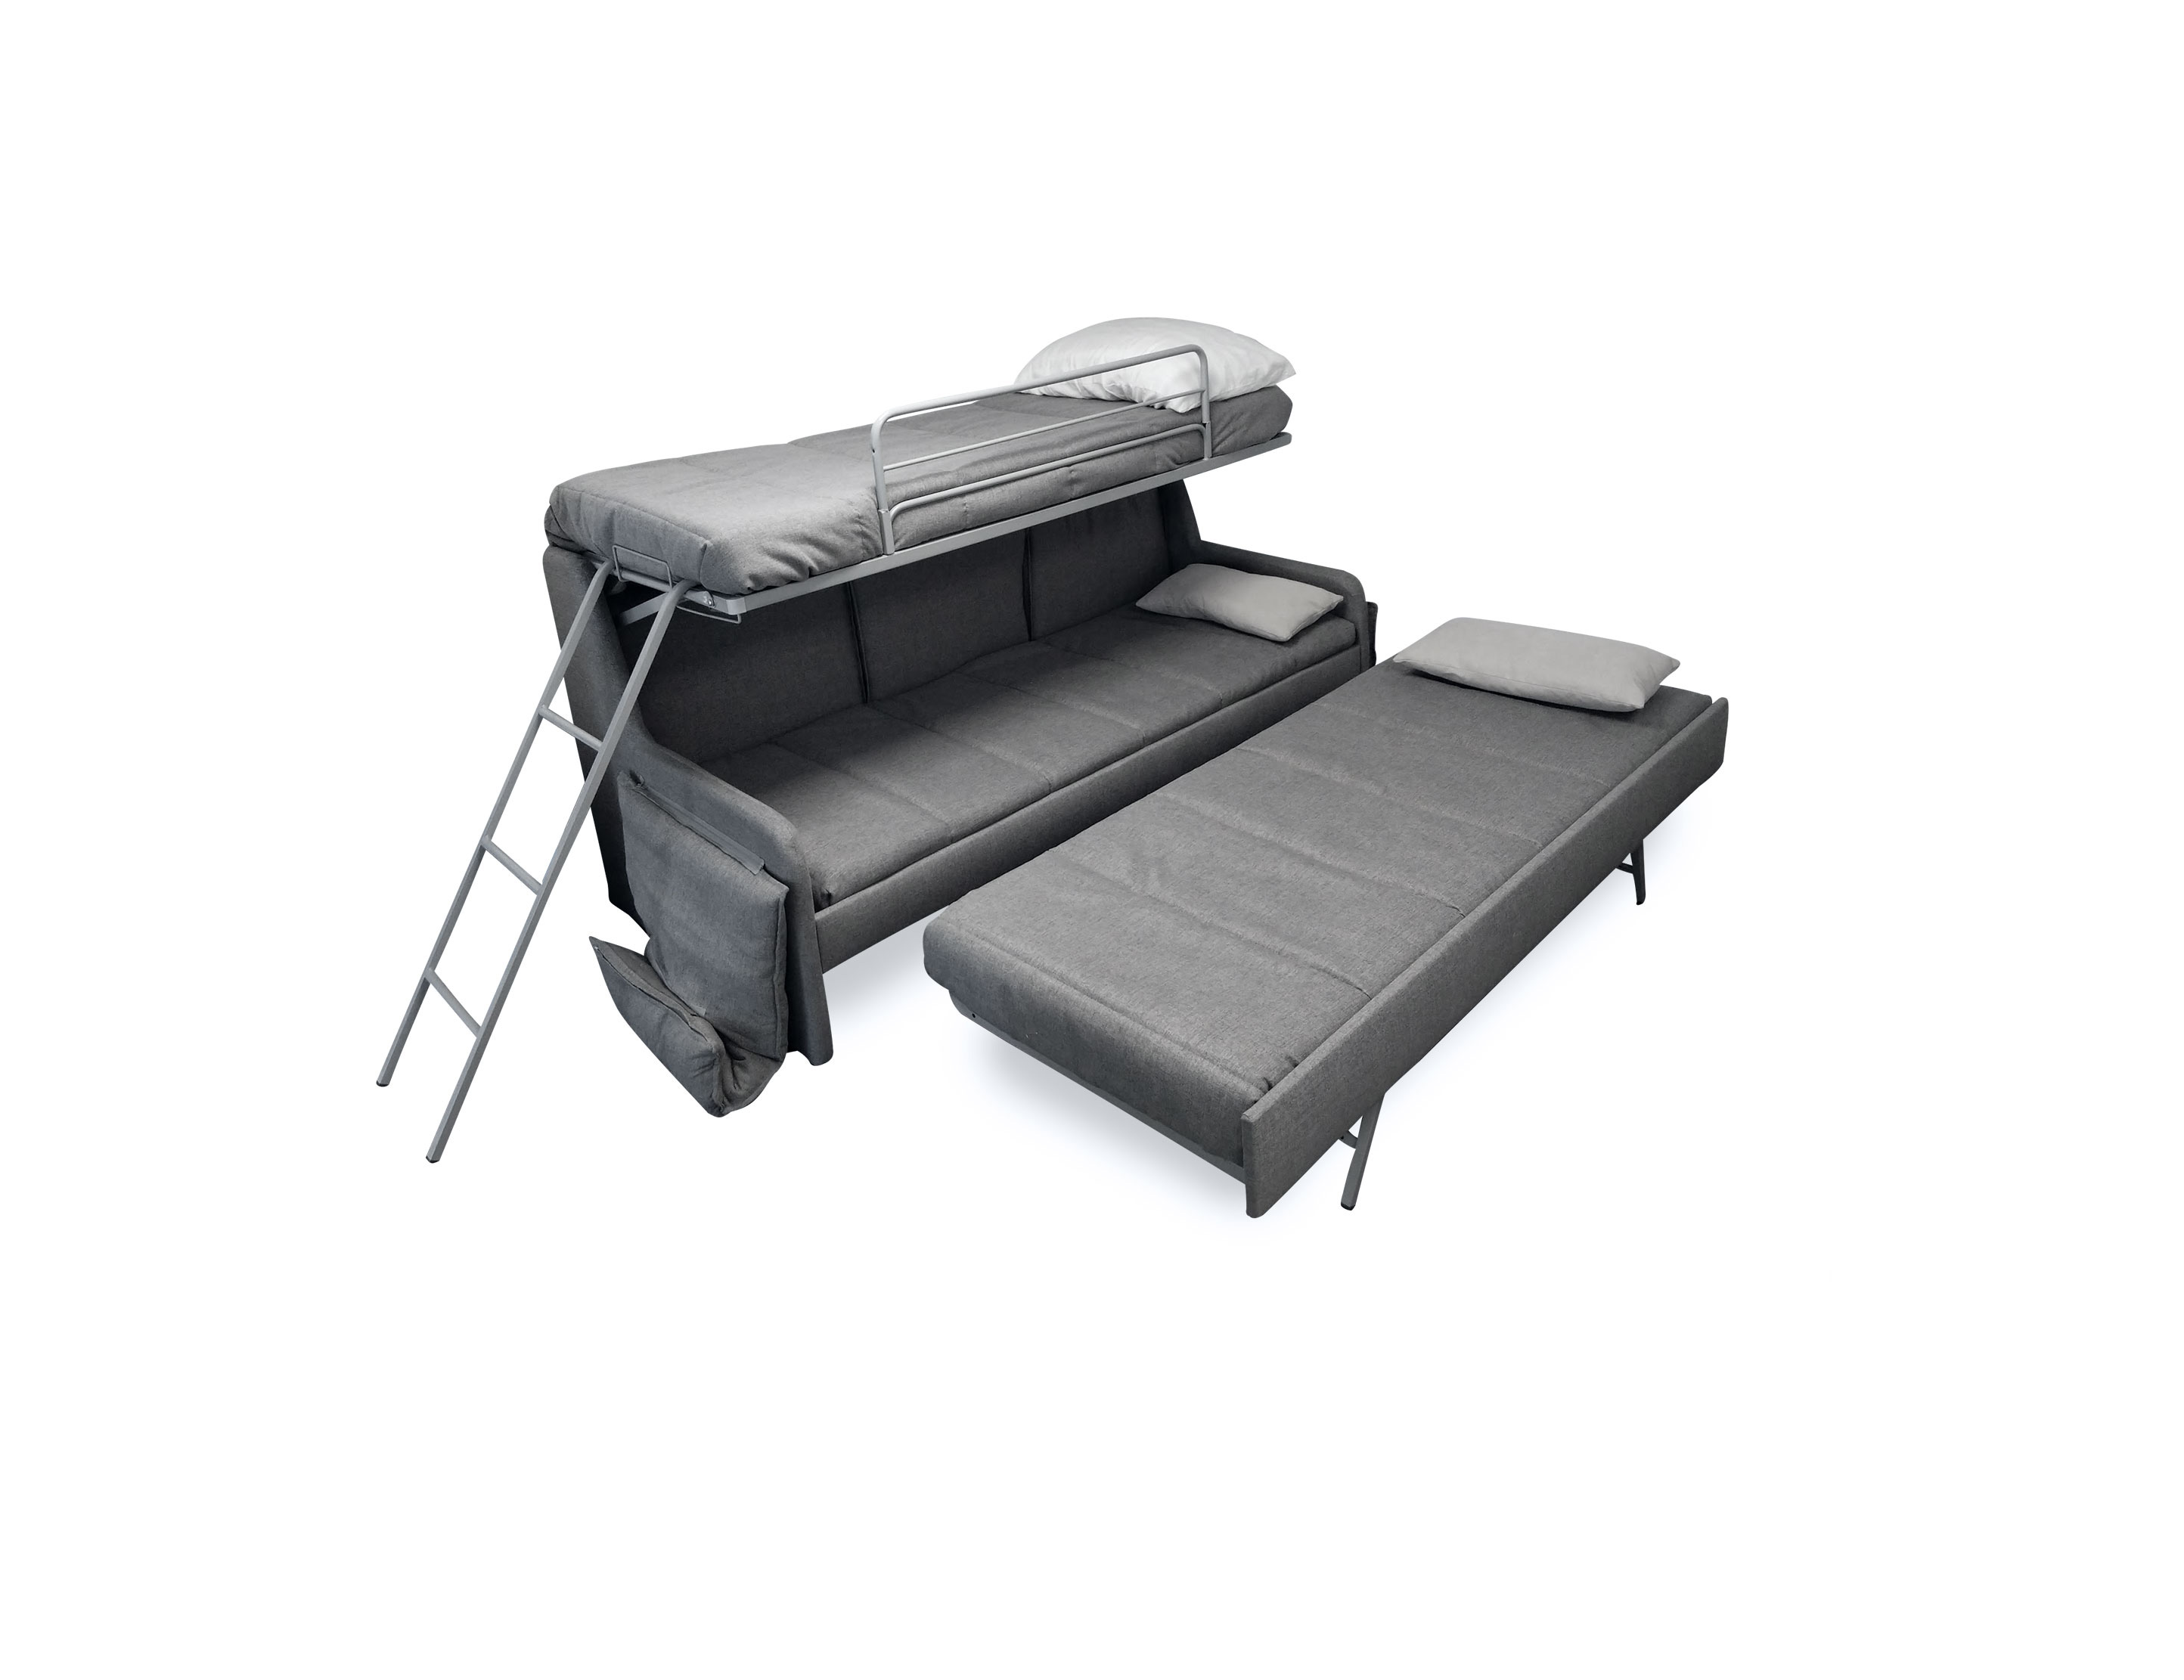 Transforming Sofa Bunk Bed Expand, Twin Beds That Can Convert To Bunk